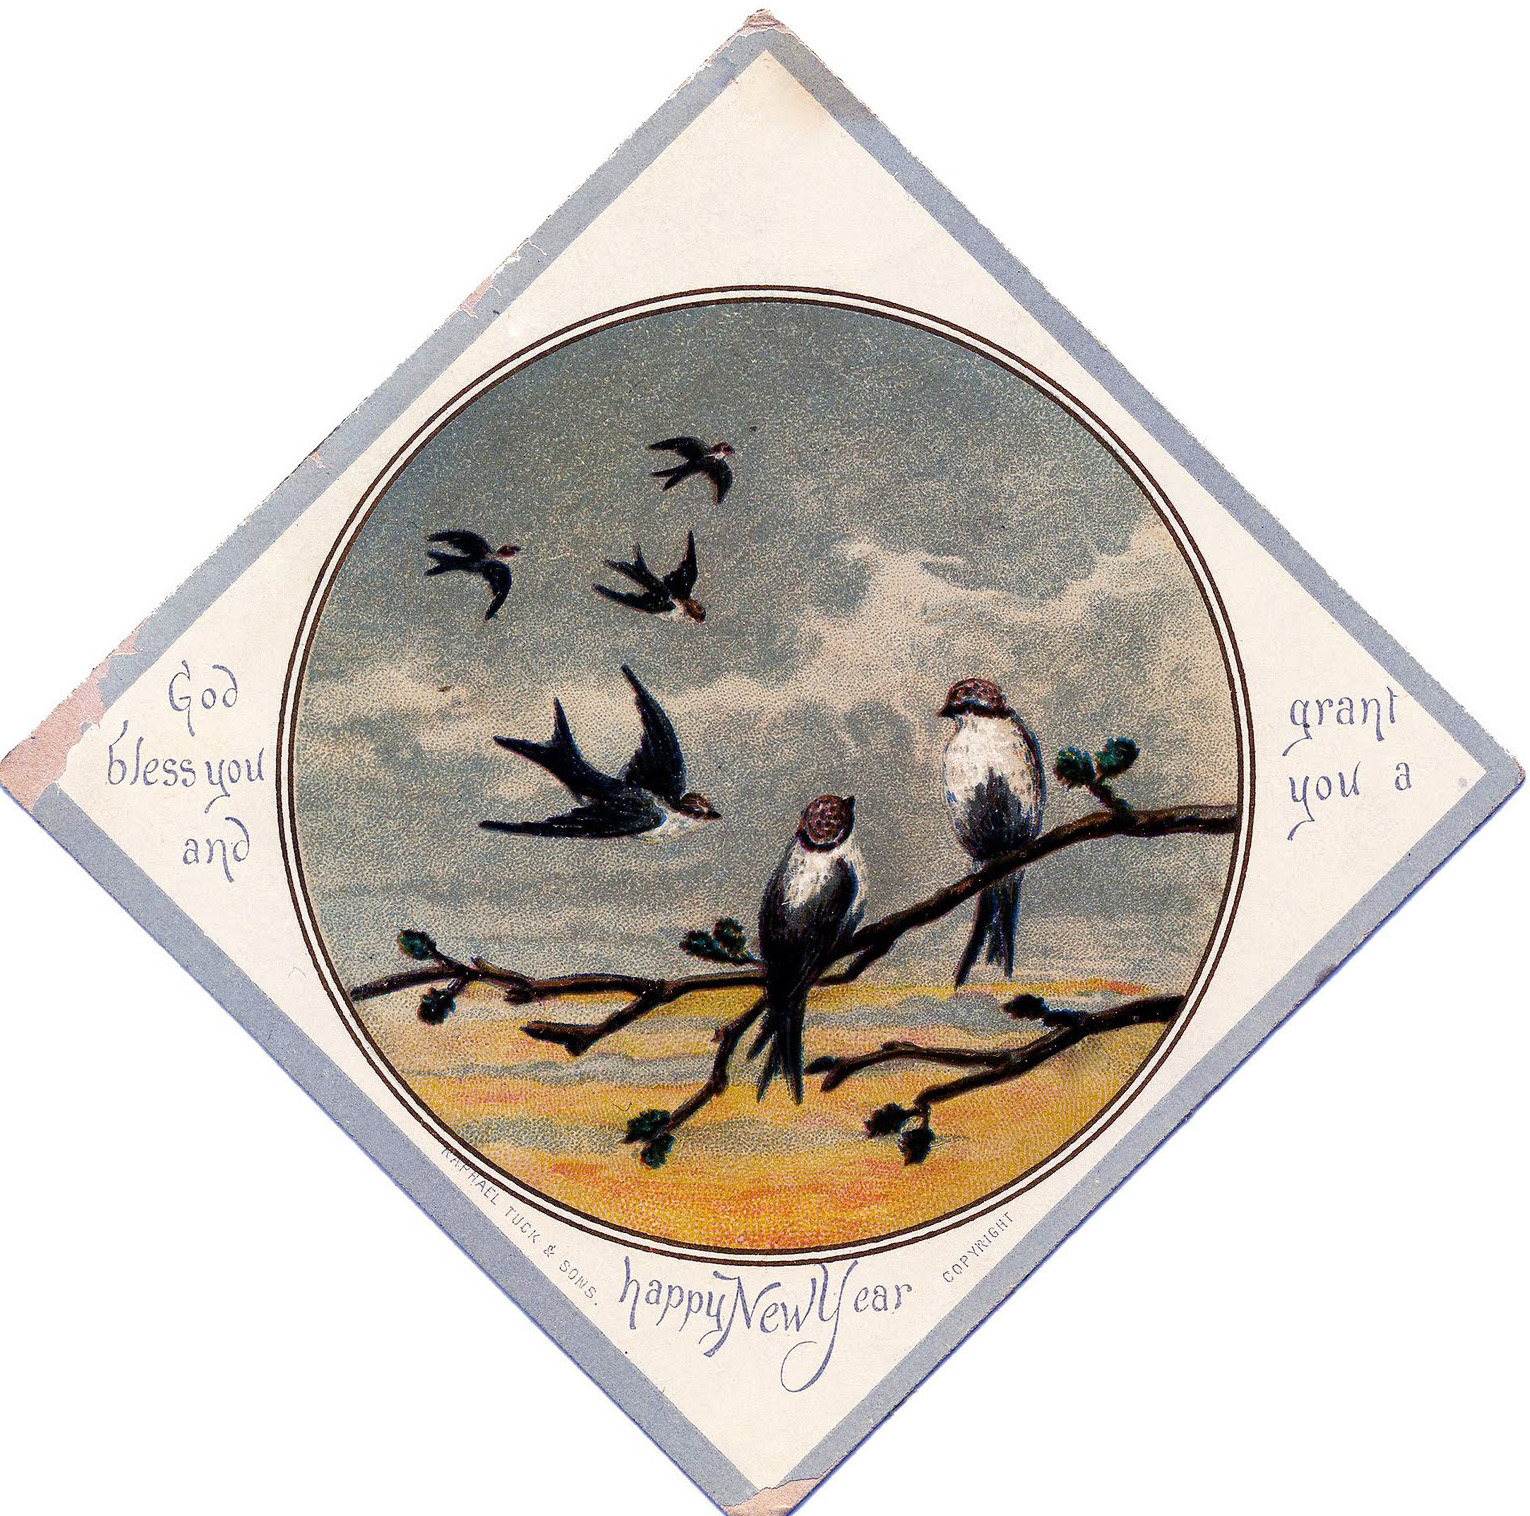 Vintage New Years card with Diamond shape that shows a branch with Swallows on it